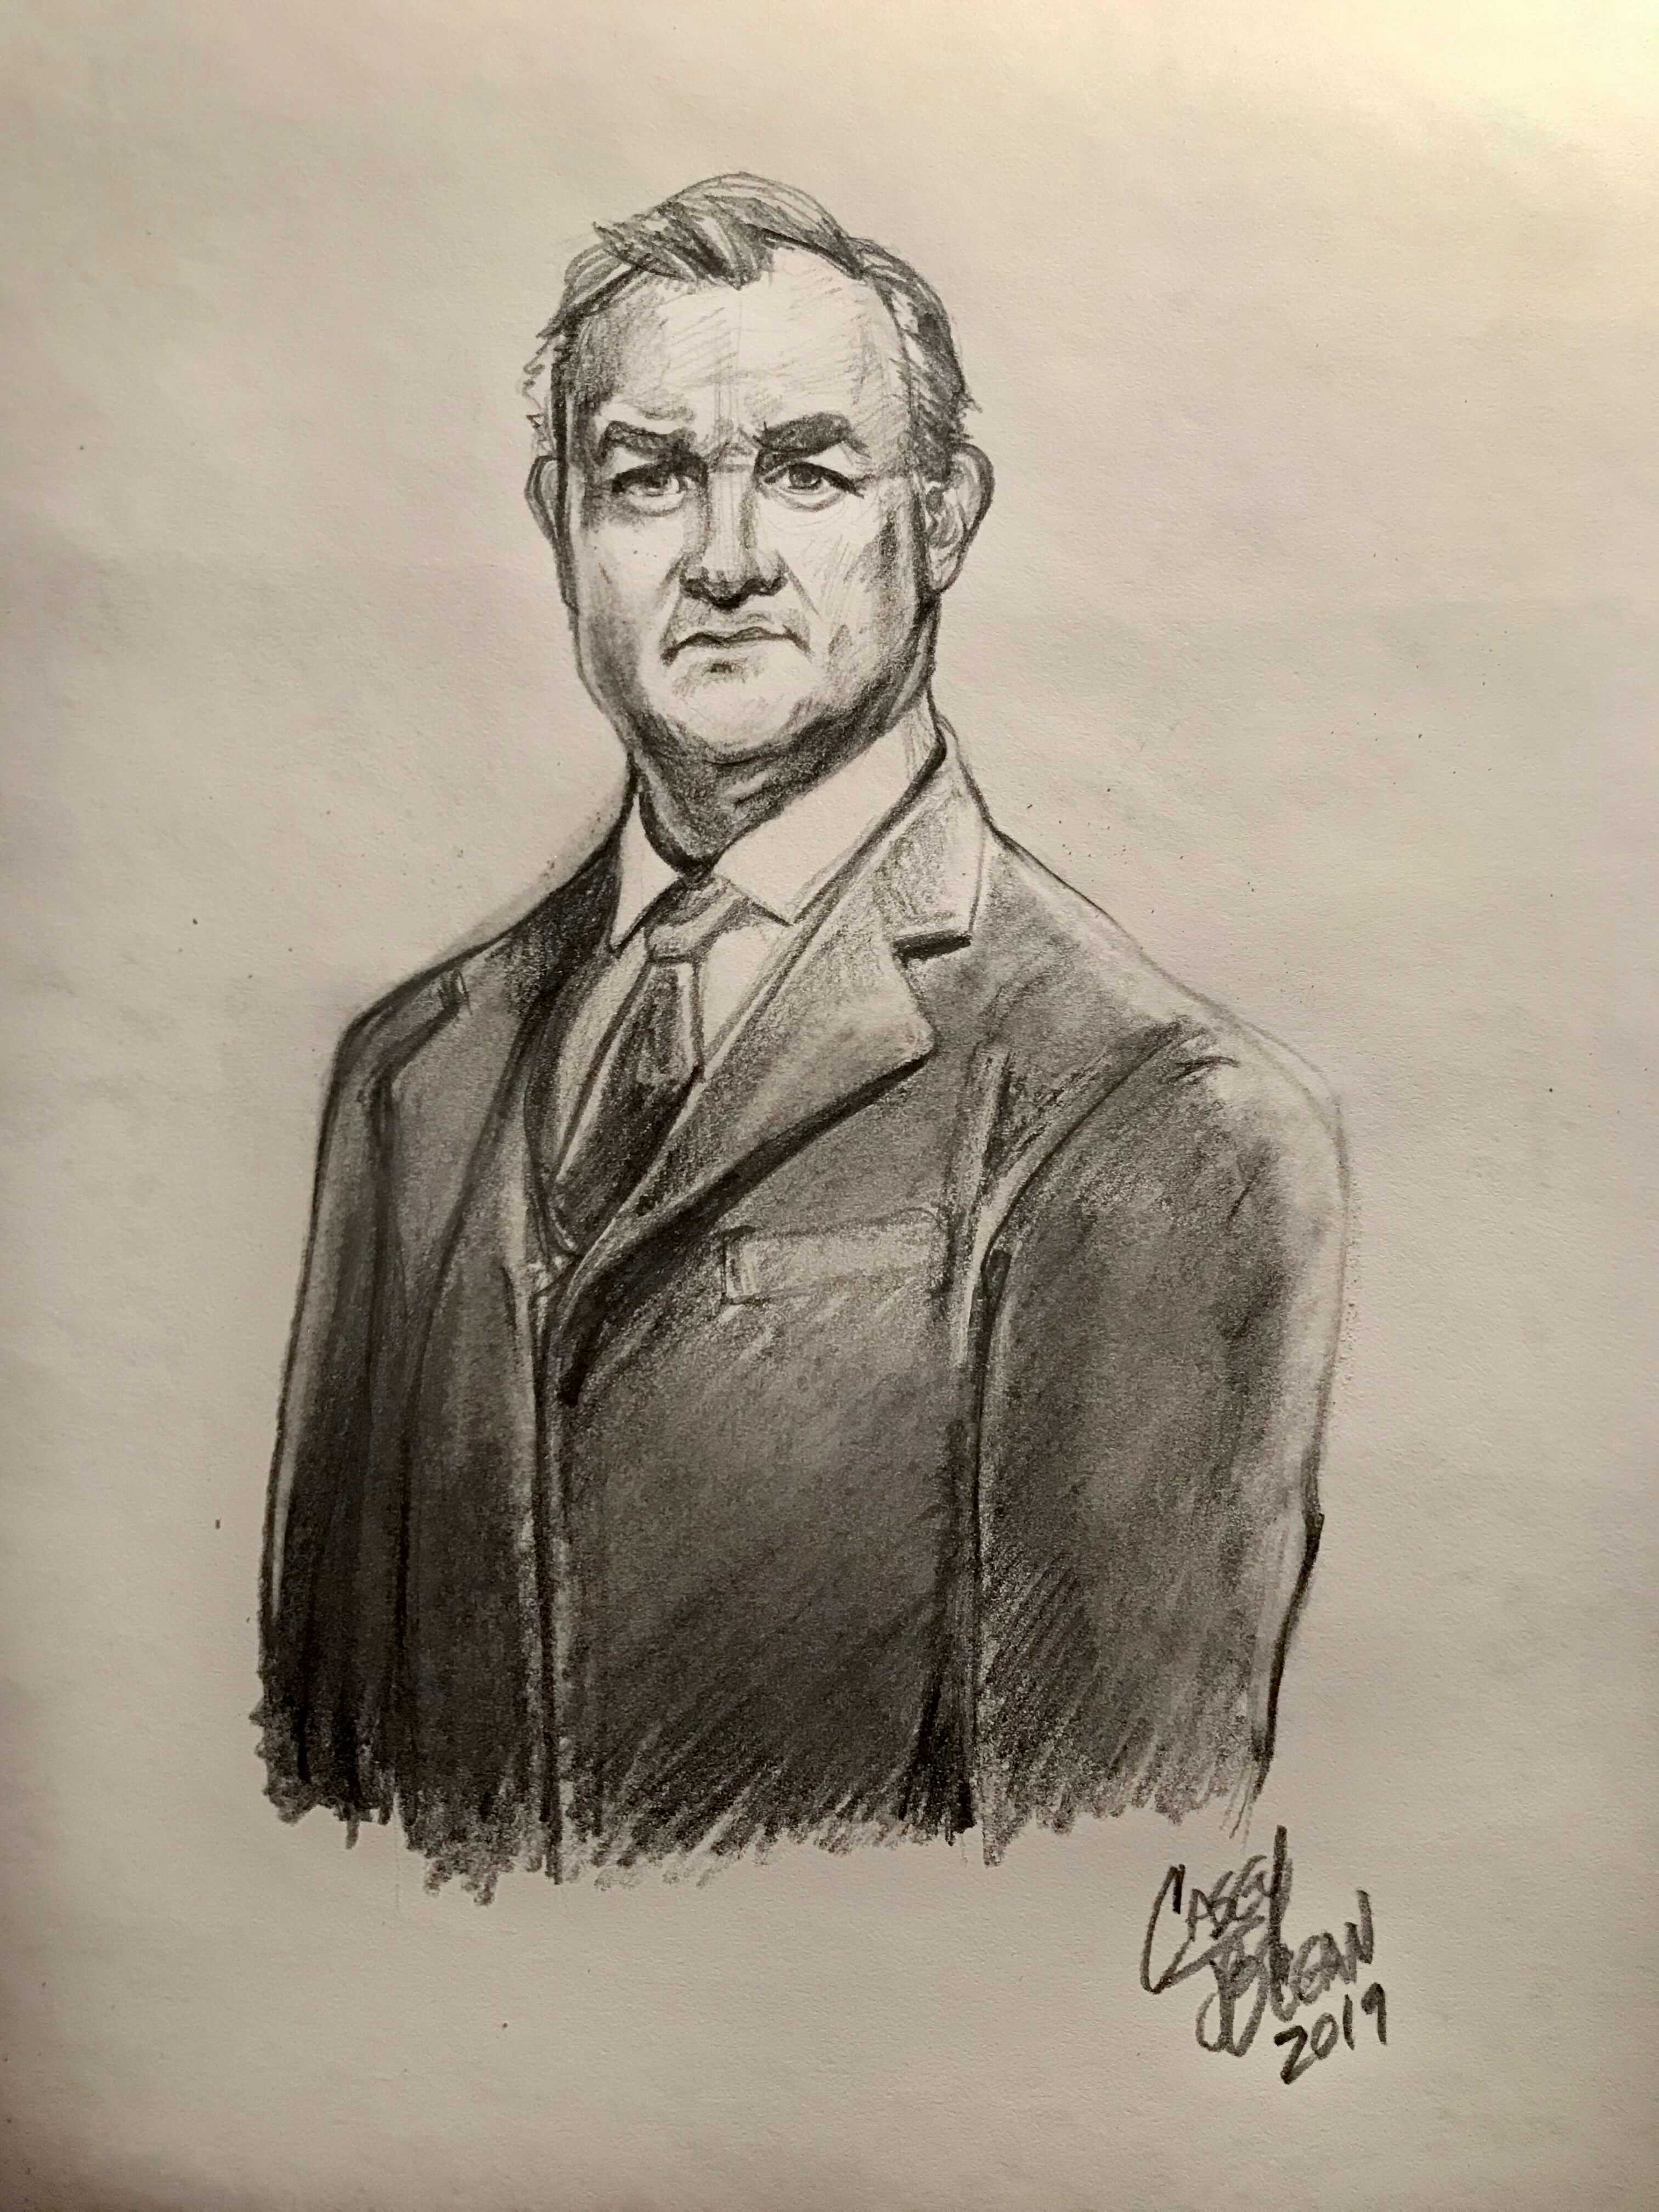 Casey Jo  Downton Abbey Character Sketches